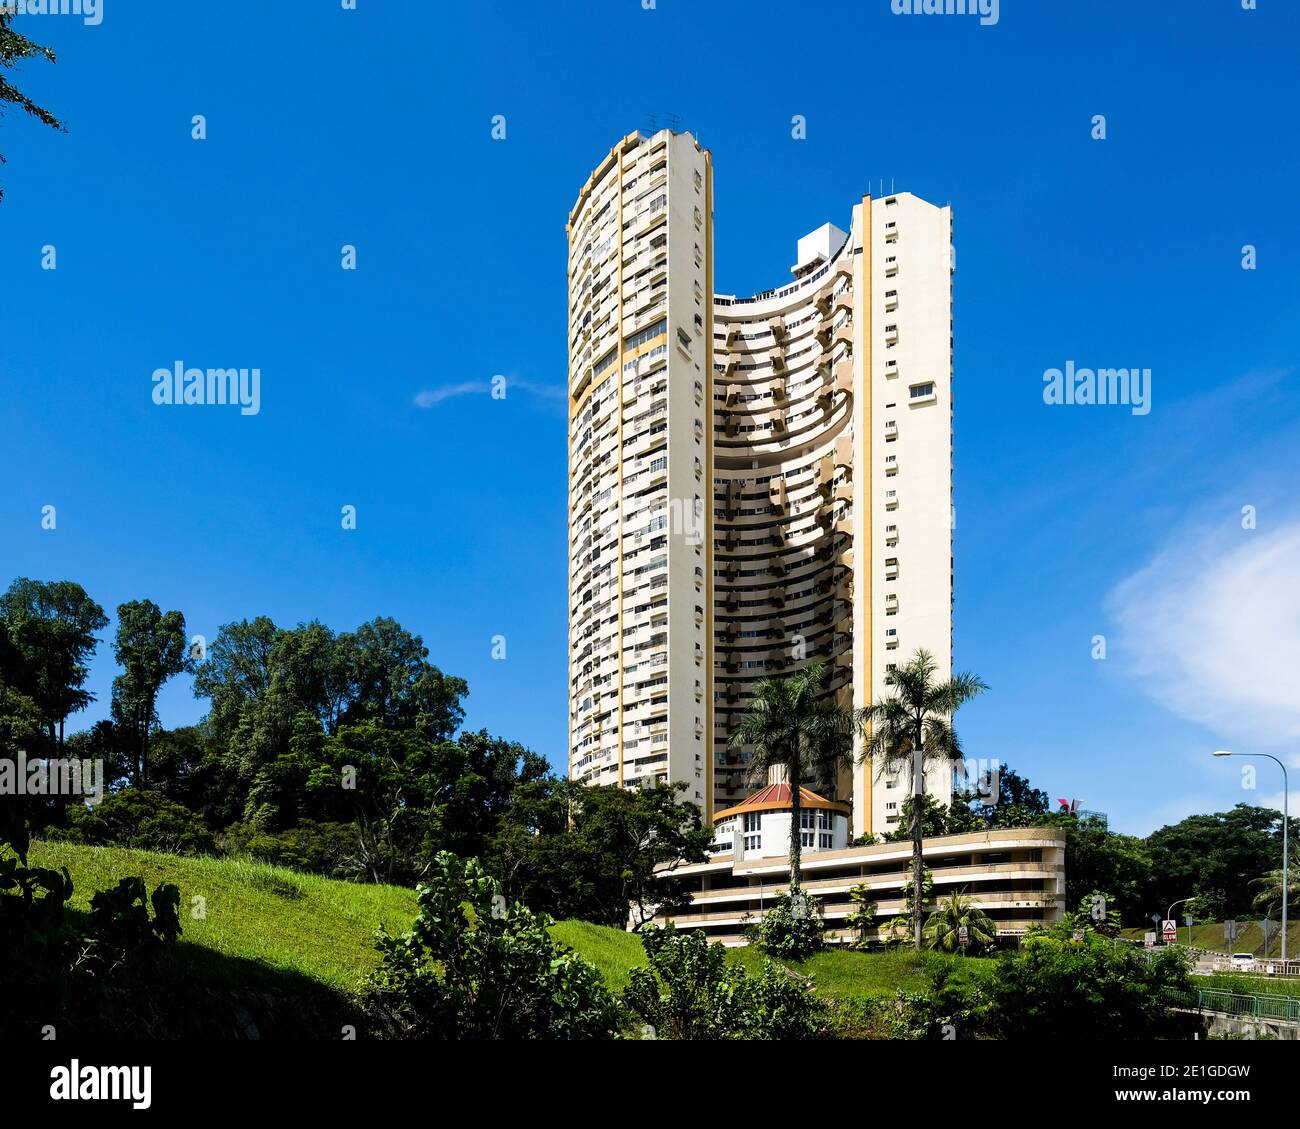 Pearl Bank Apartments is a high-rise private residential building on Pearl's Hill in Outram, Singapore. Stock Photo